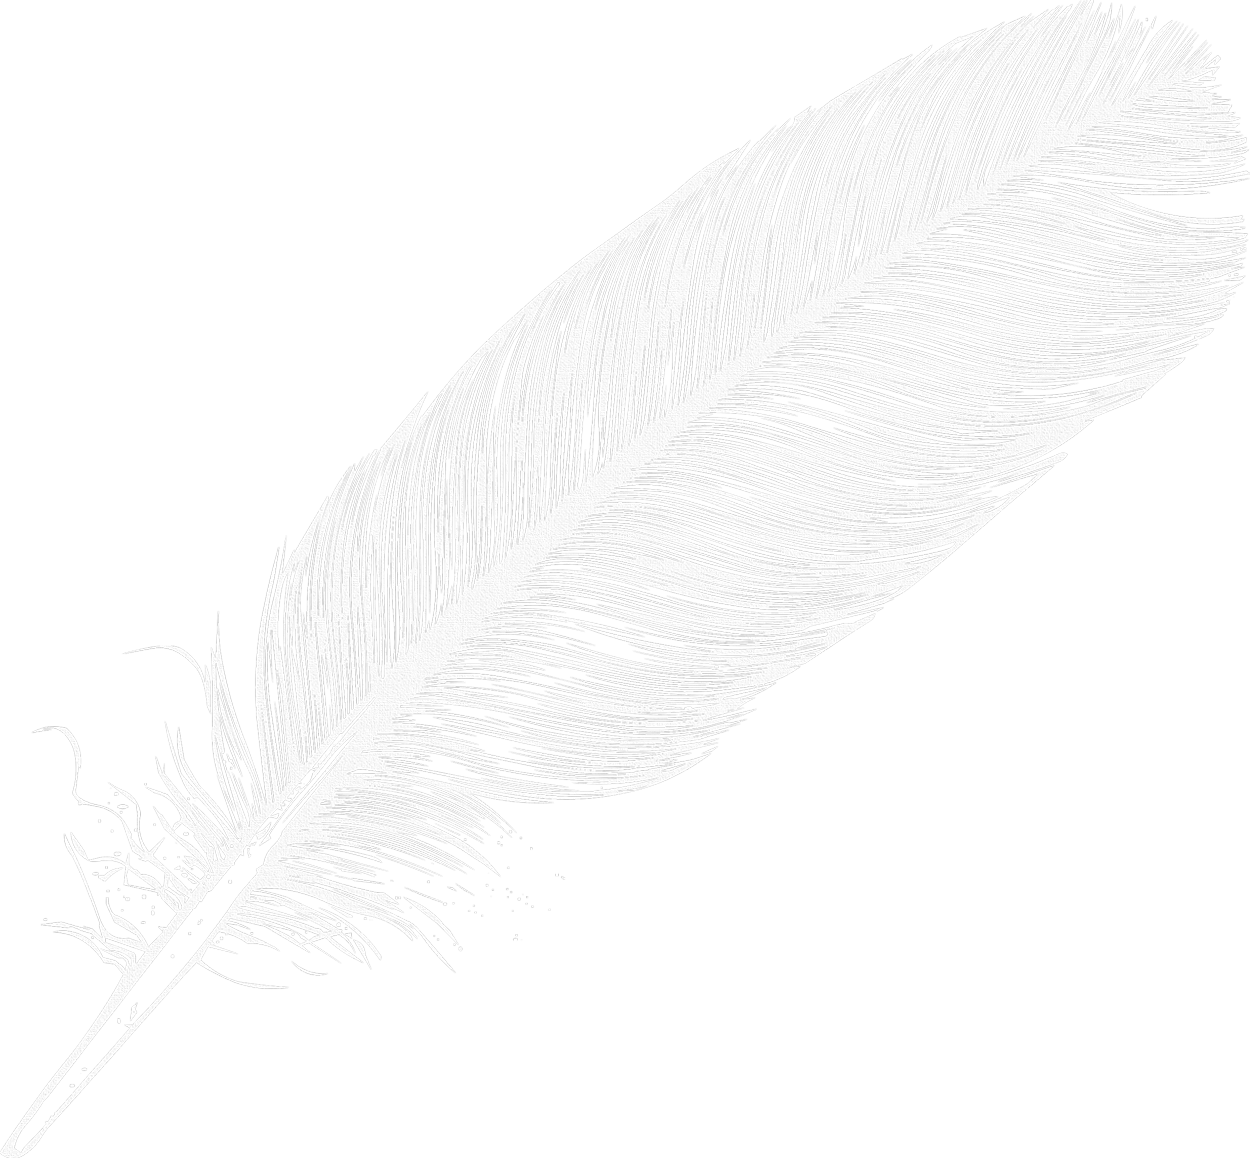 Large White Transparent Feather PNG Clipart